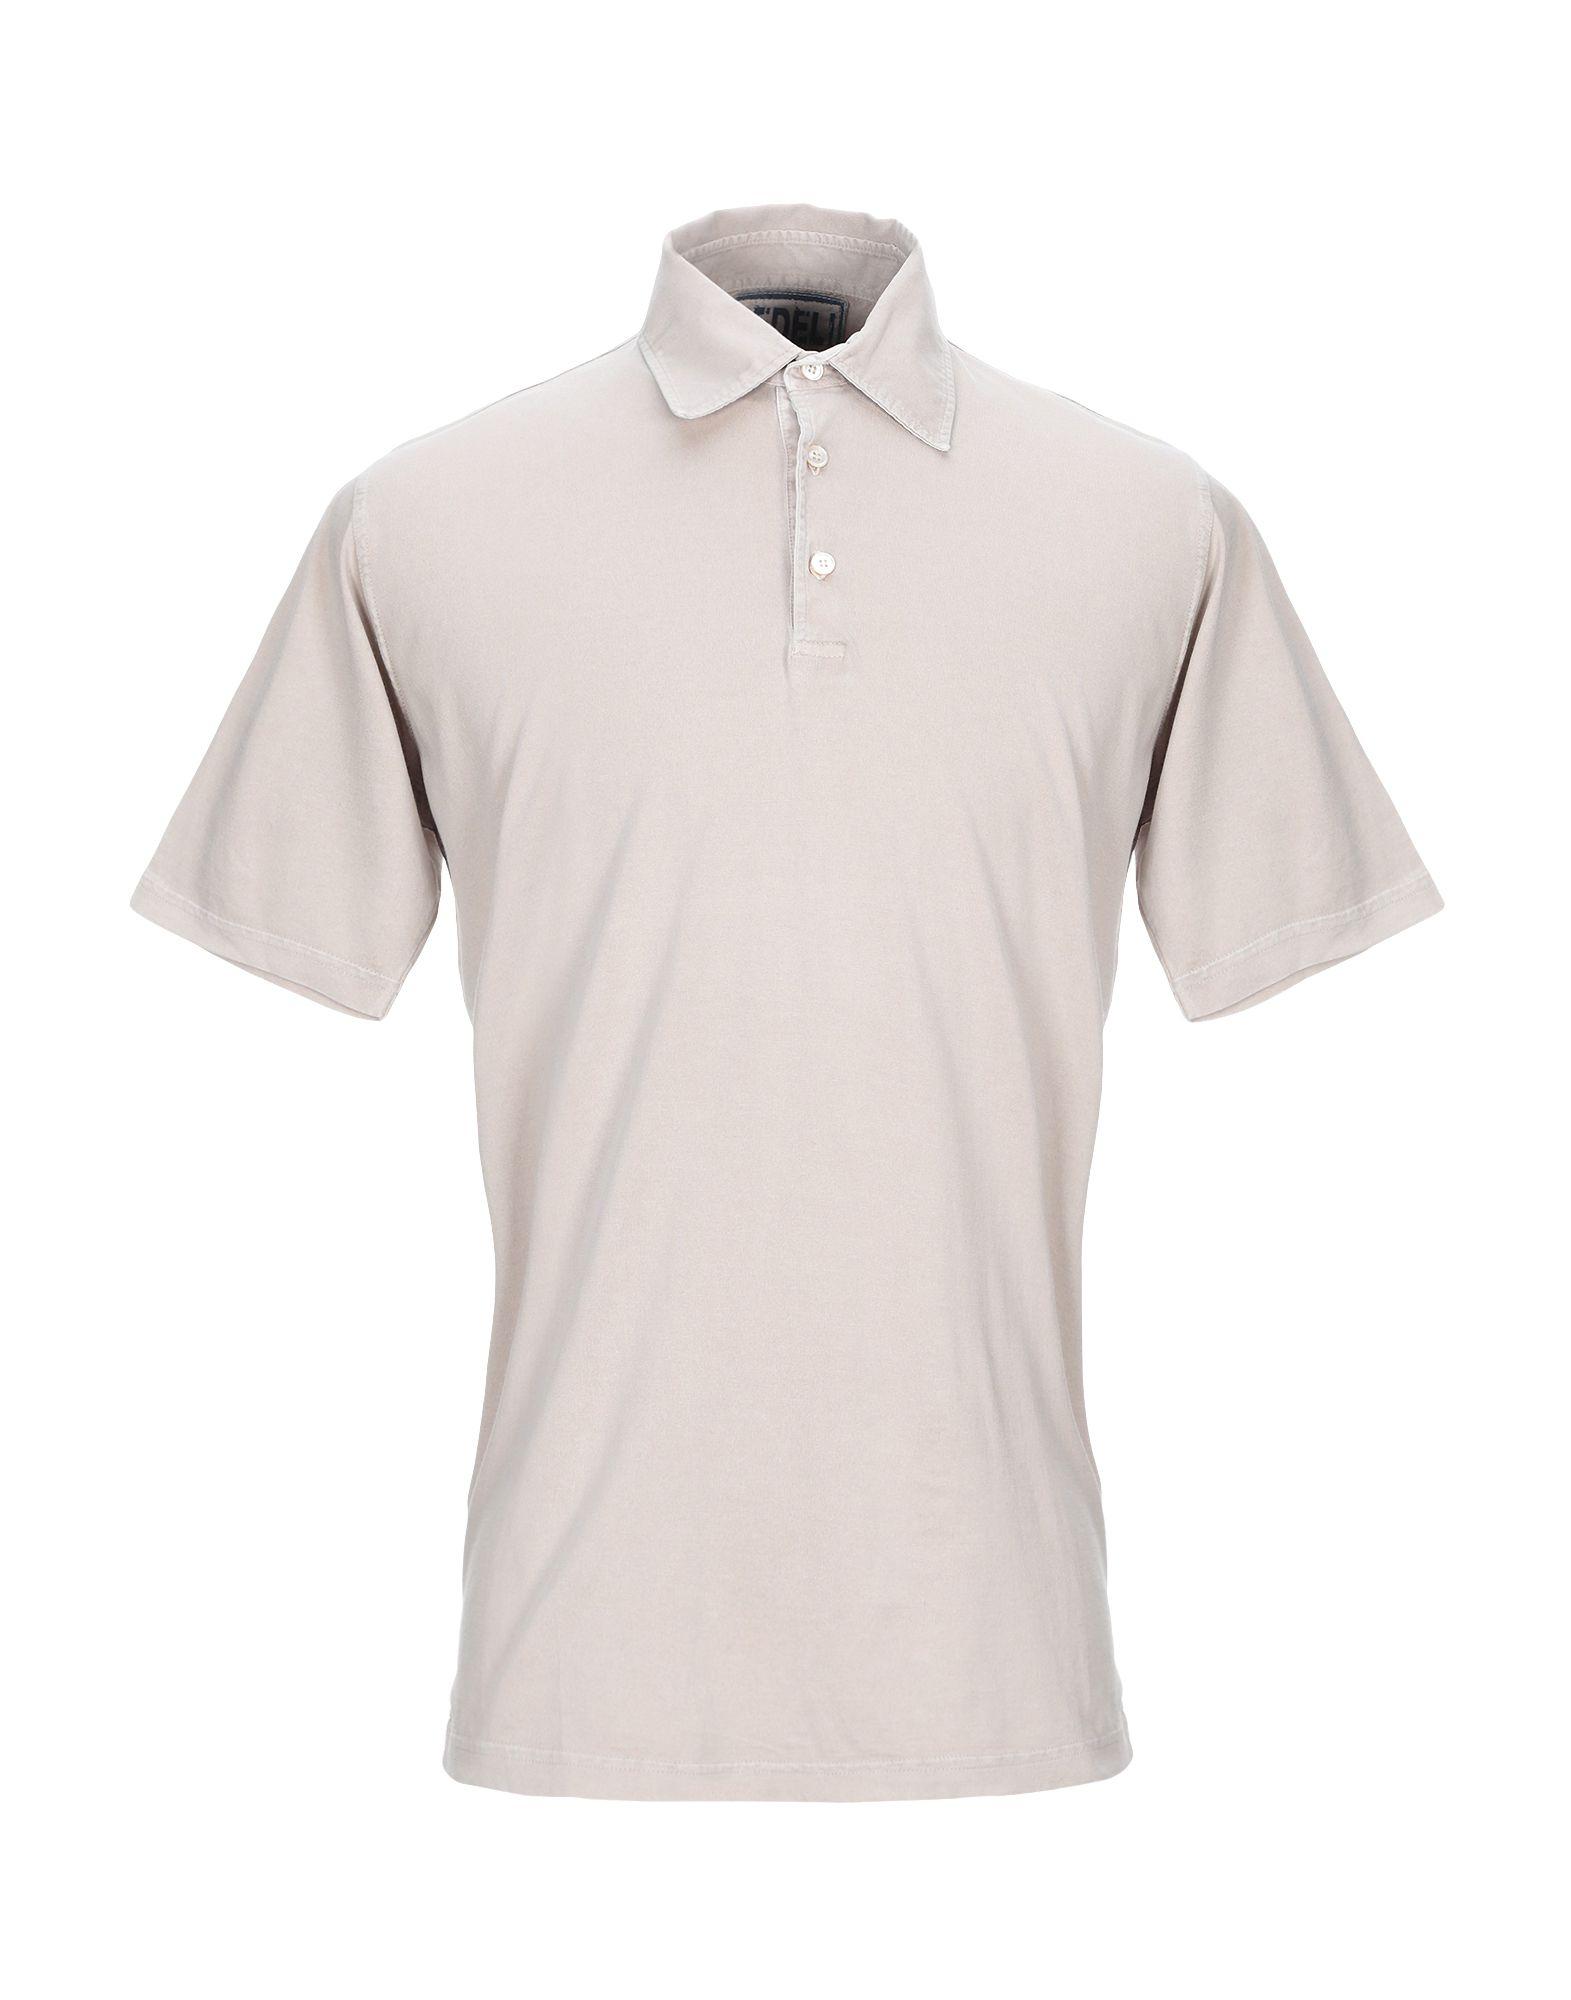 Fedeli Polo Shirt in Natural for Men - Lyst